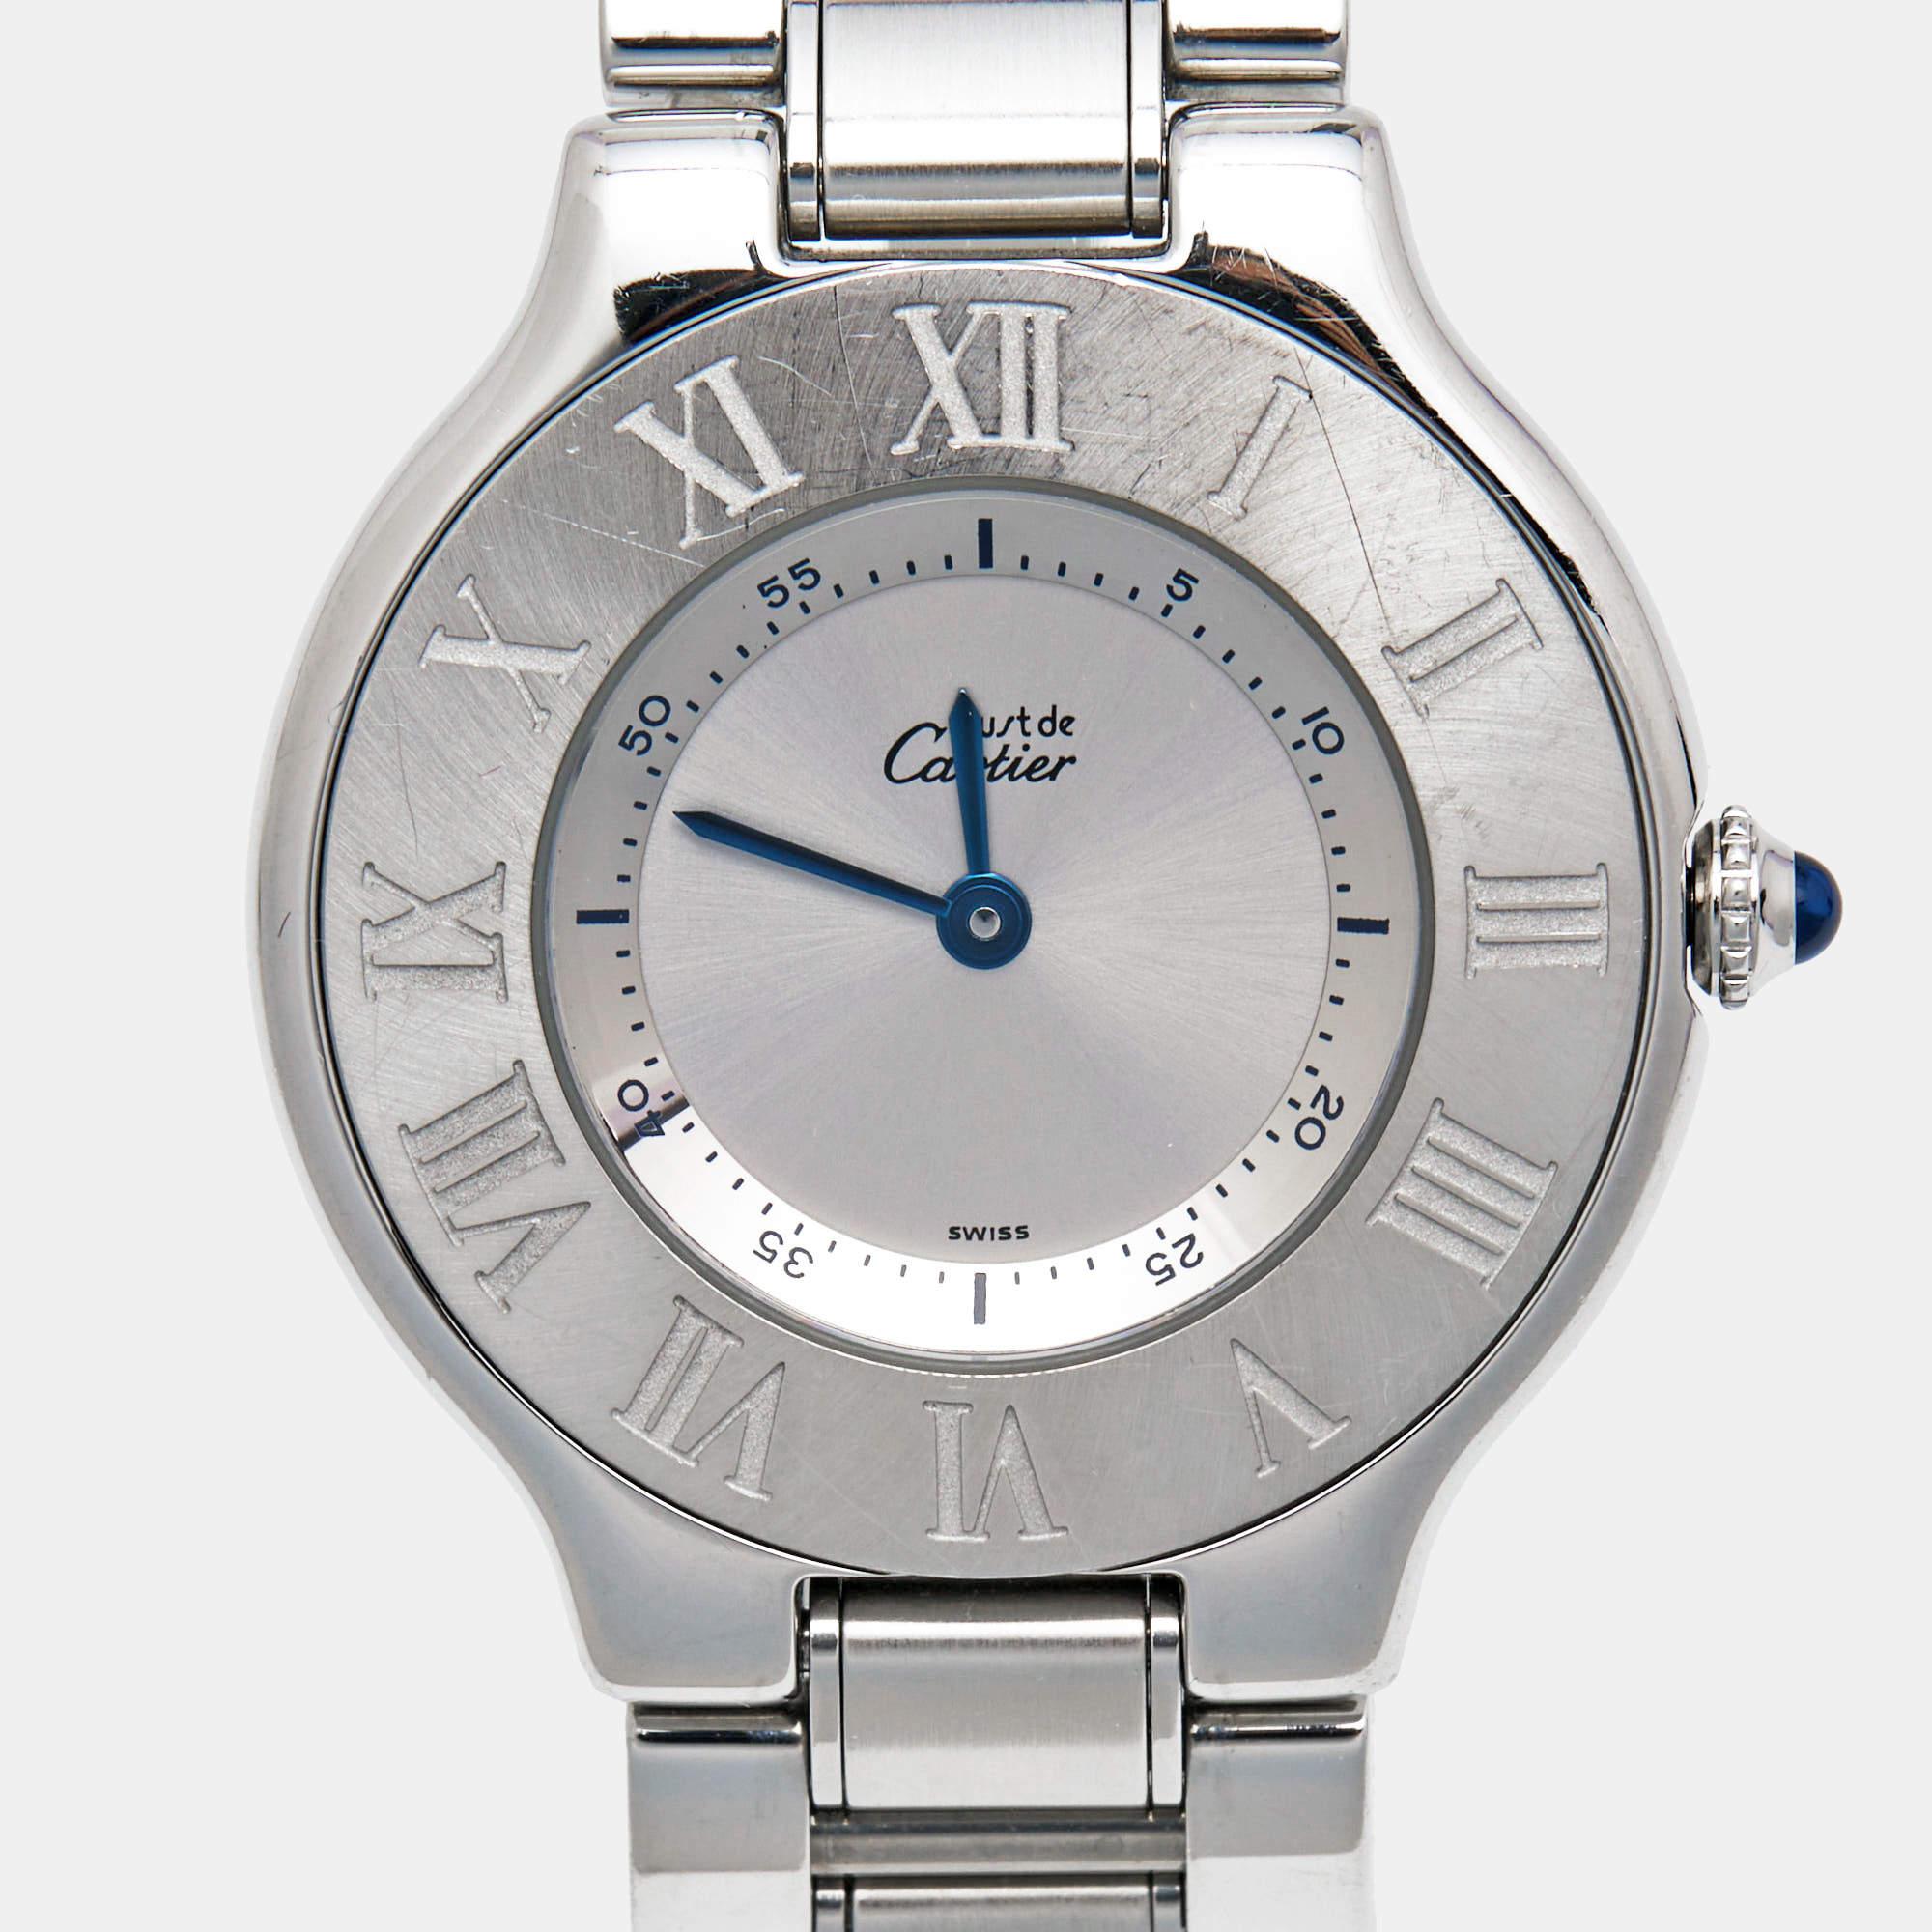 The Cartier Must De Cartier 21 1330 women's wristwatch is an exquisite timepiece that combines classic elegance with modern functionality. It features a sleek stainless steel case and bracelet, with a luxurious silver-grey dial adorned with the